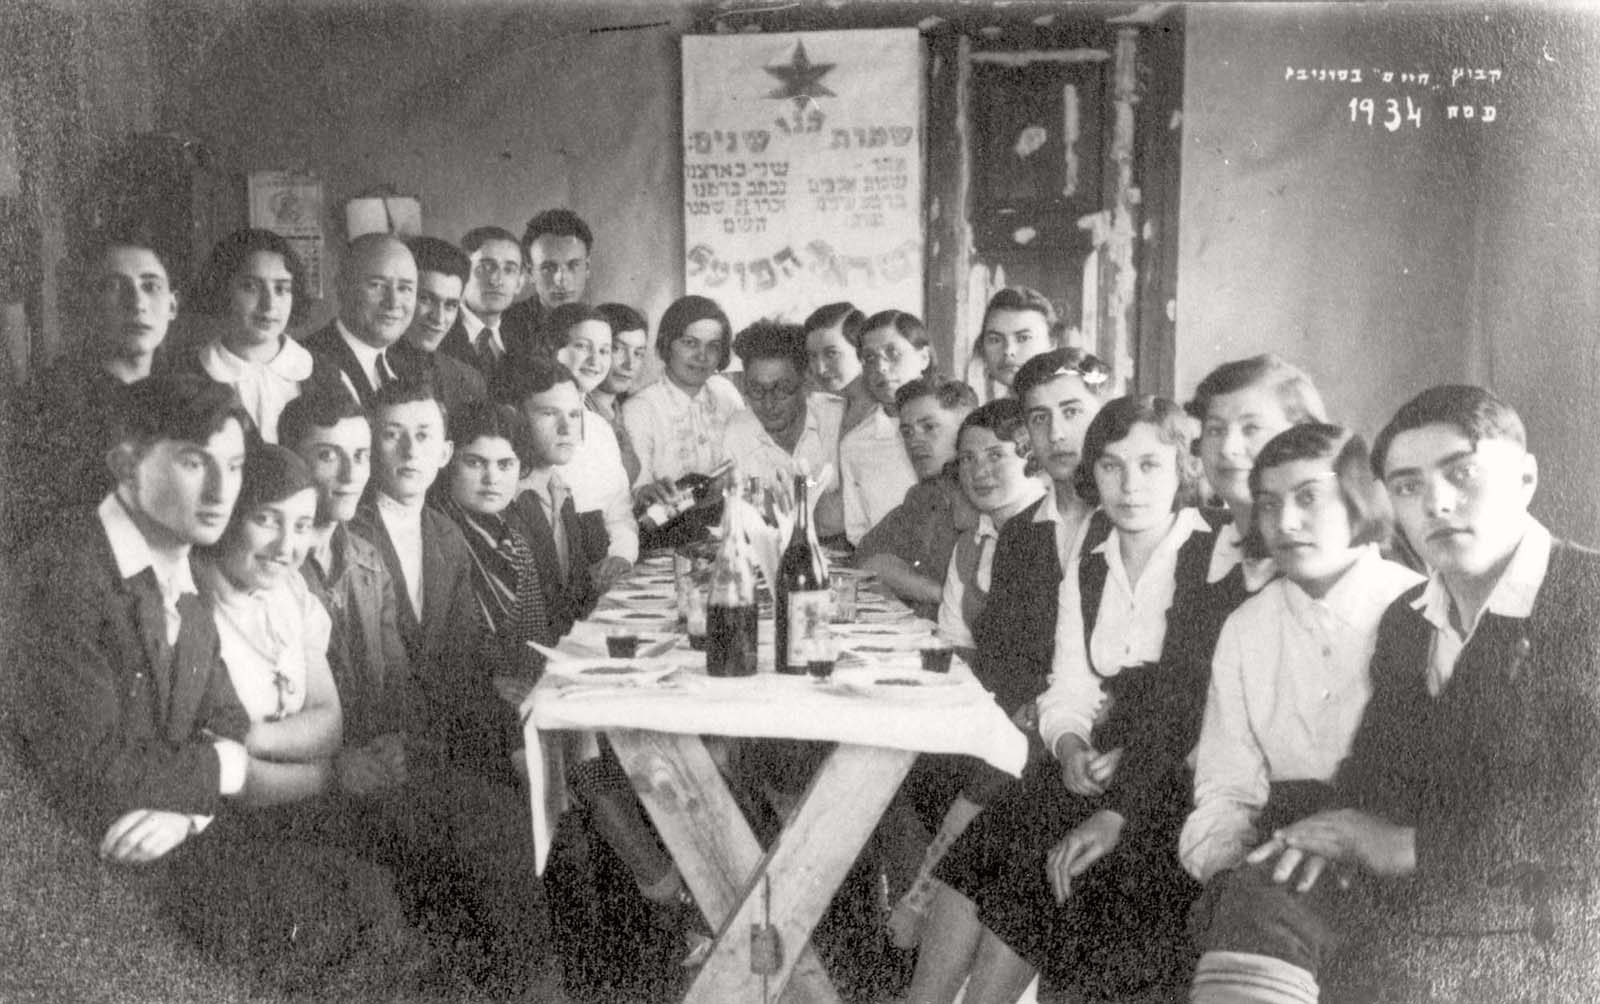 Passover at  Kibbutz Chaim, an urban kibbutz, Panevezys, Lithuania, 1934<br>Zelda Charit is second from the right. Rivka Shub is seventh from the left, in a light colored shirt.